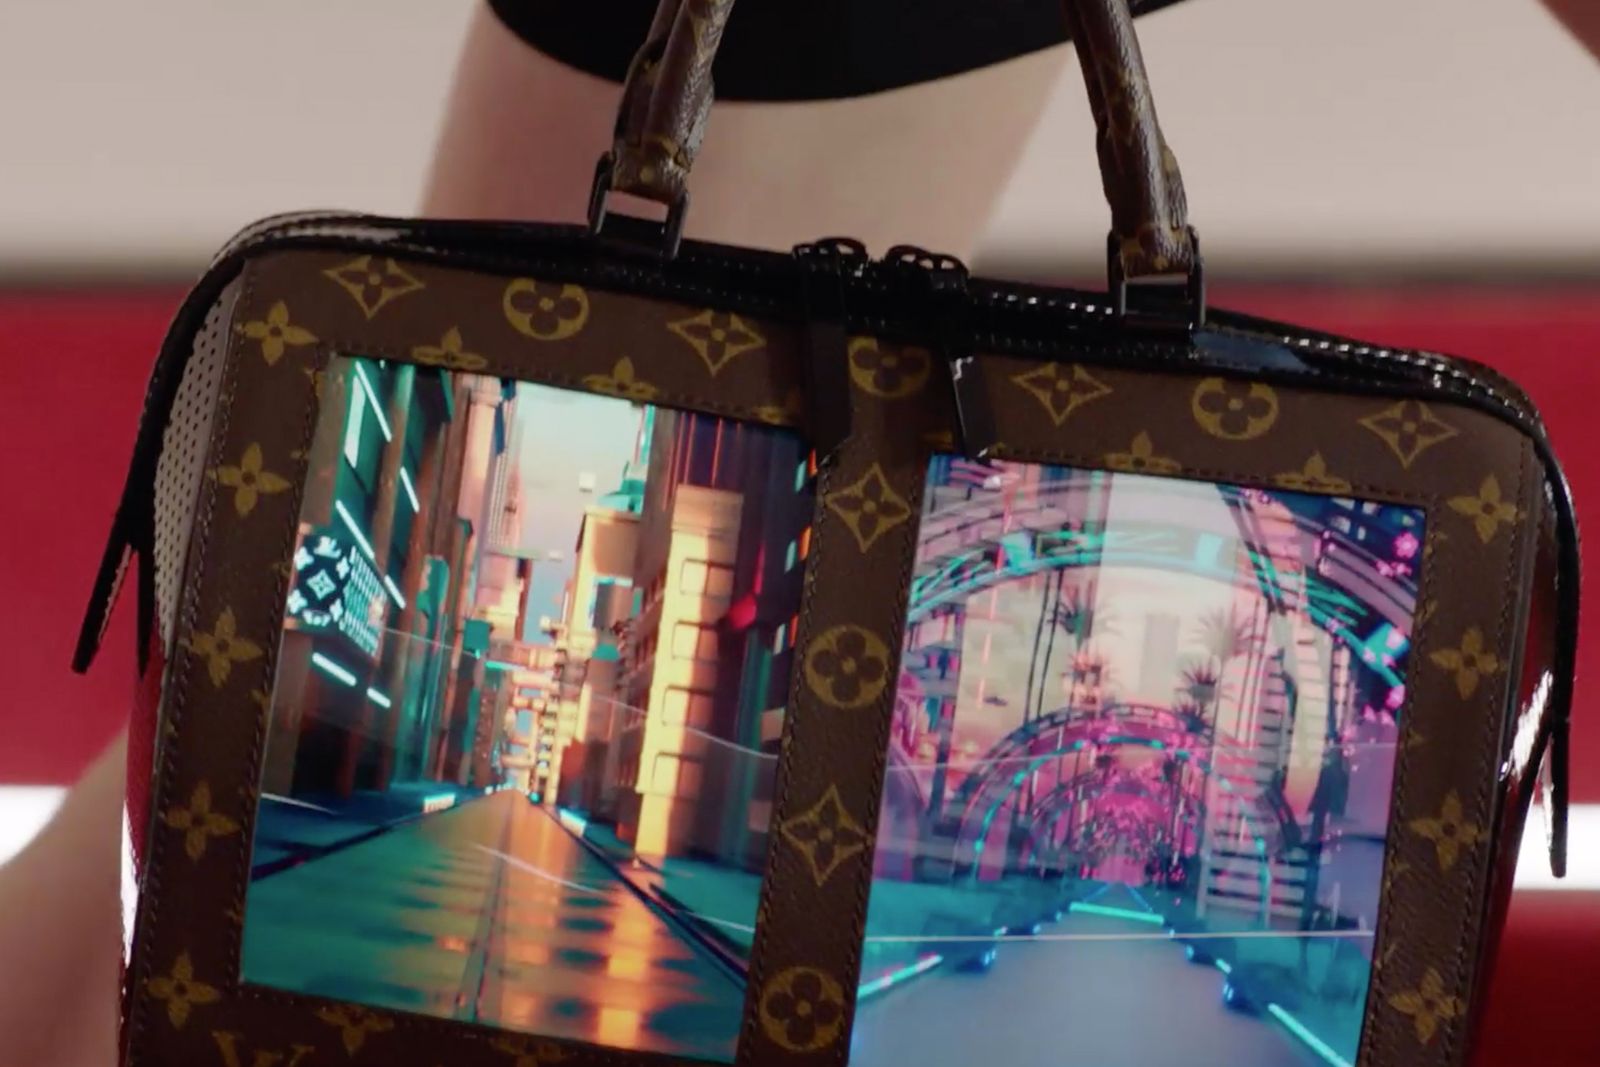 Louis Vuitton OLED bags image 1